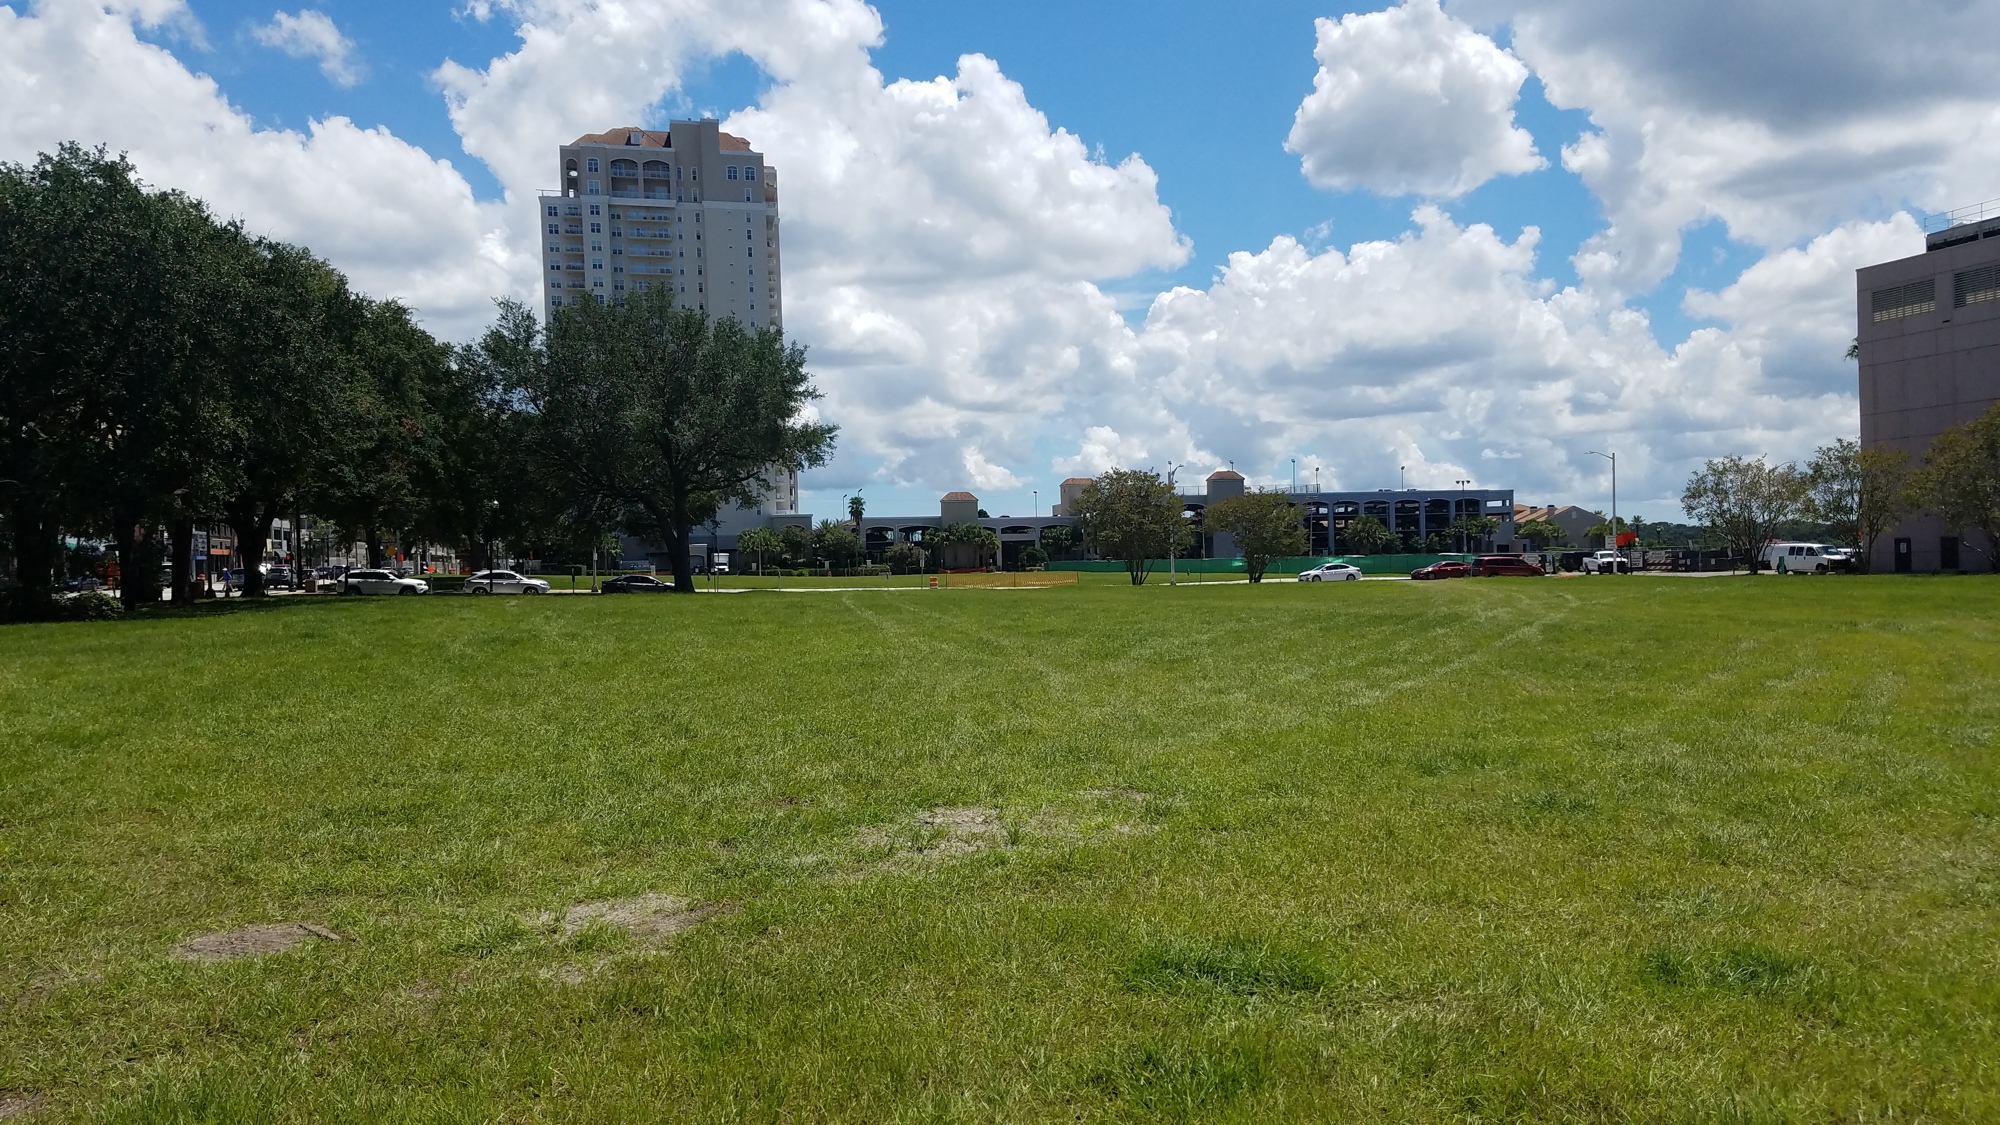 The view from Newnan Street looking east toward the Plaza Condominium at Berkman Plaza and Marina. The lawn is the former site of the old City Hall Annex that was imploded January 20.